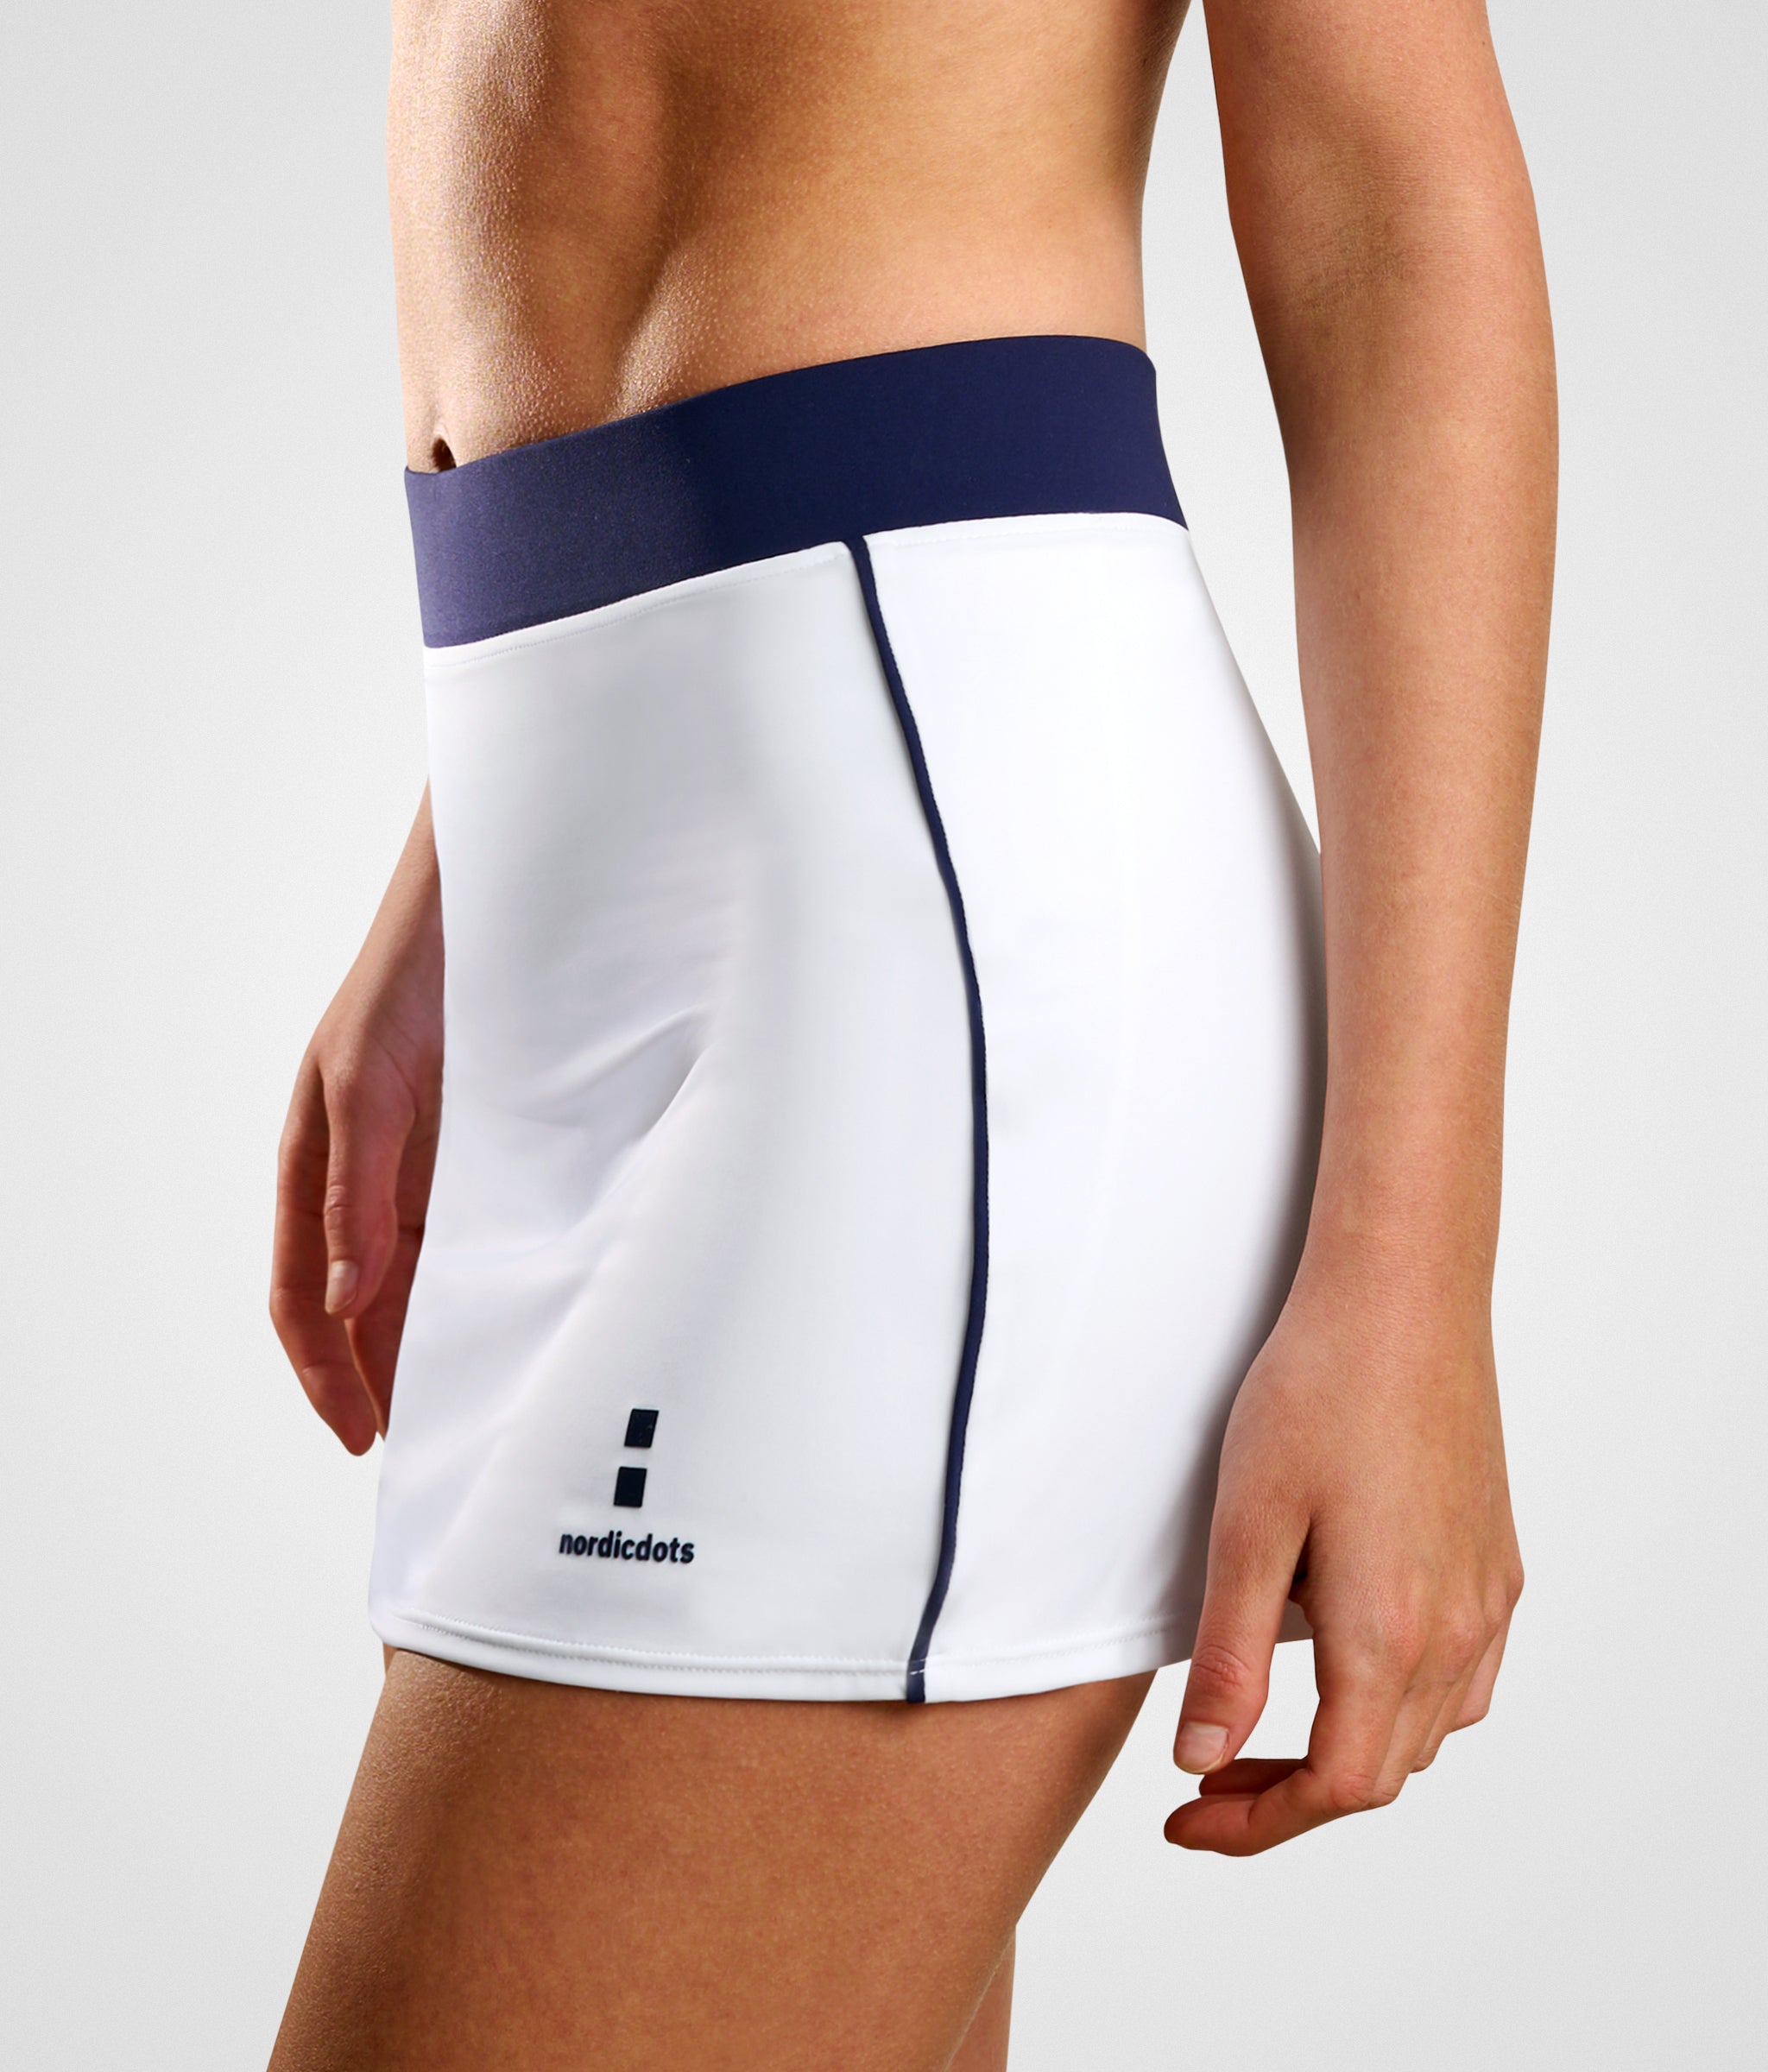 nordicdots performance skirt white for padel, tennis or golf with flat elastic waistband and built-in compression shorts